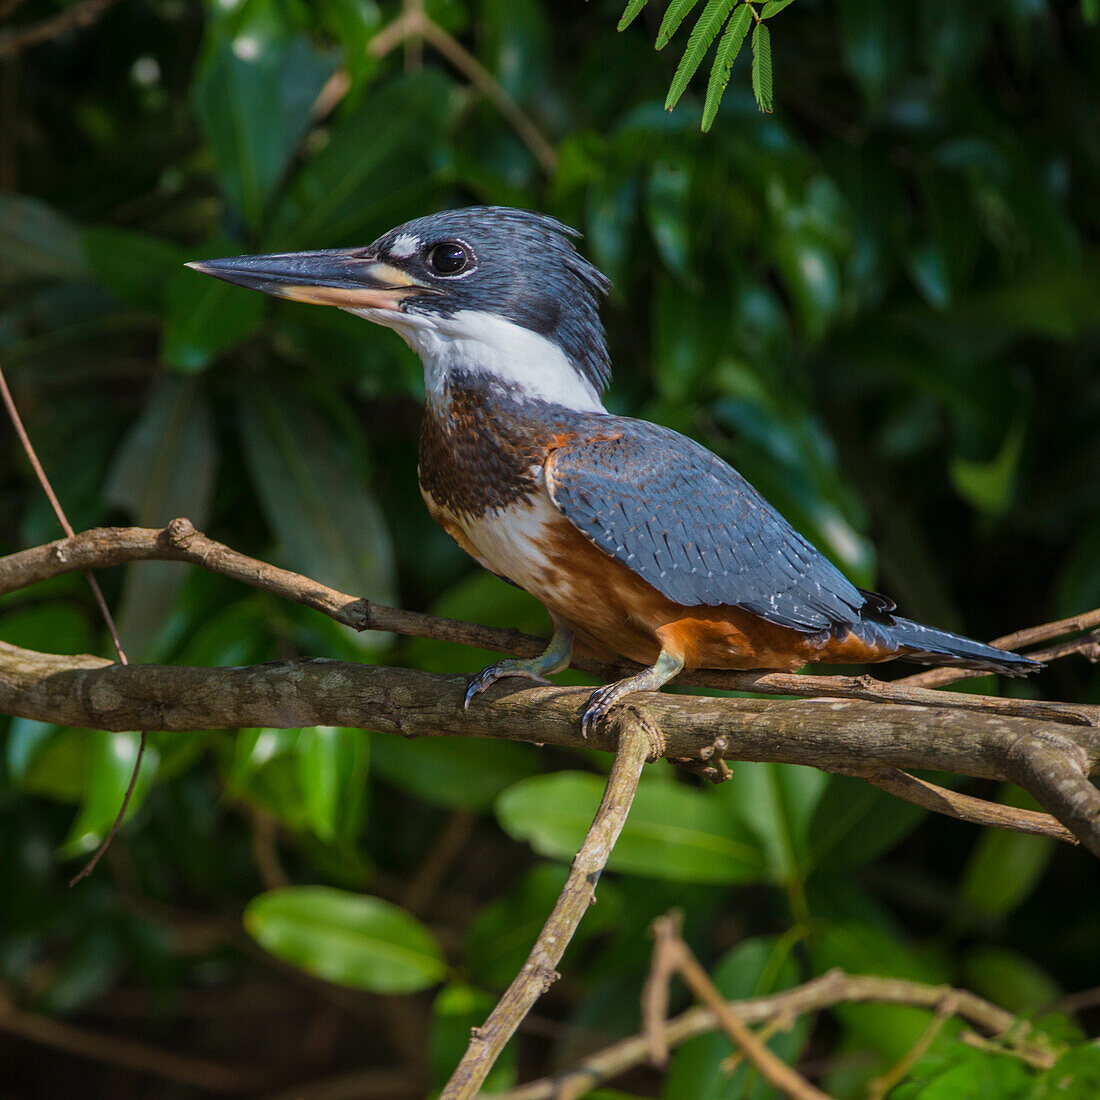 Brazil. An Amazon kingfisher (Chloroceryle amazona) with a small captured fish in the Pantanal, the world's largest tropical wetland area, UNESCO World Heritage Site.